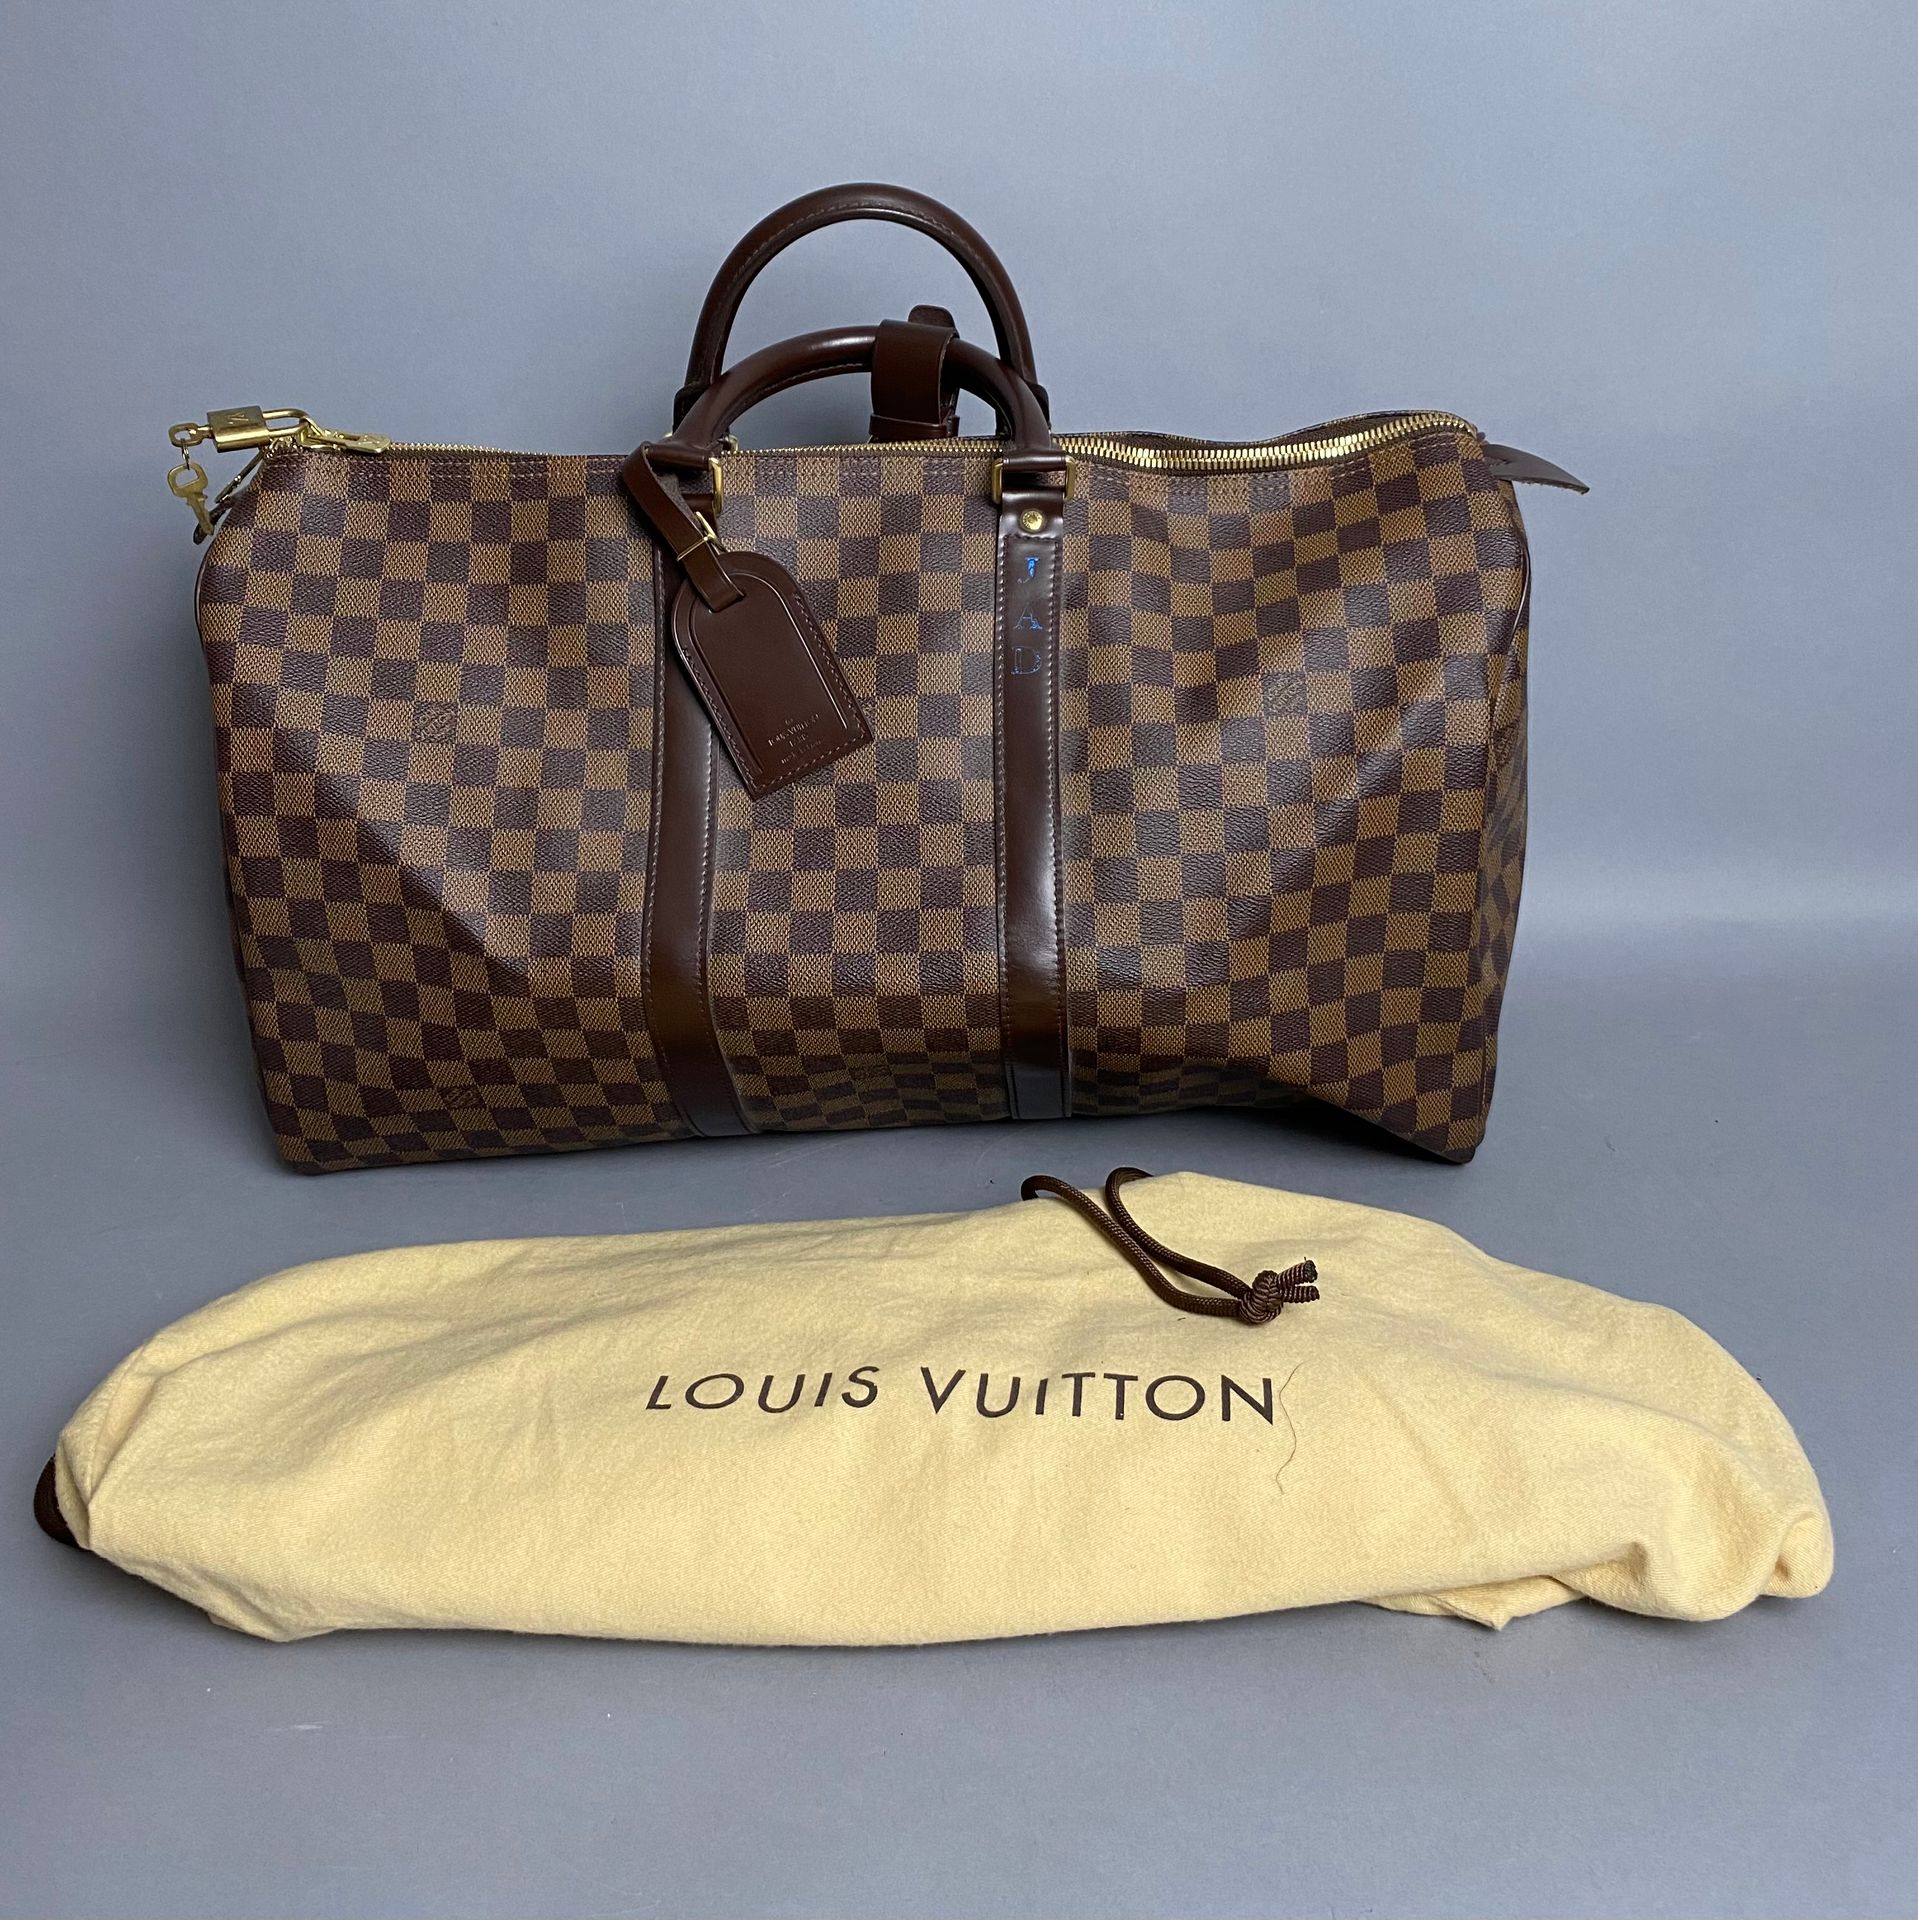 LOUIS VUITTON. Travel bag Keepall model in brown canvas …